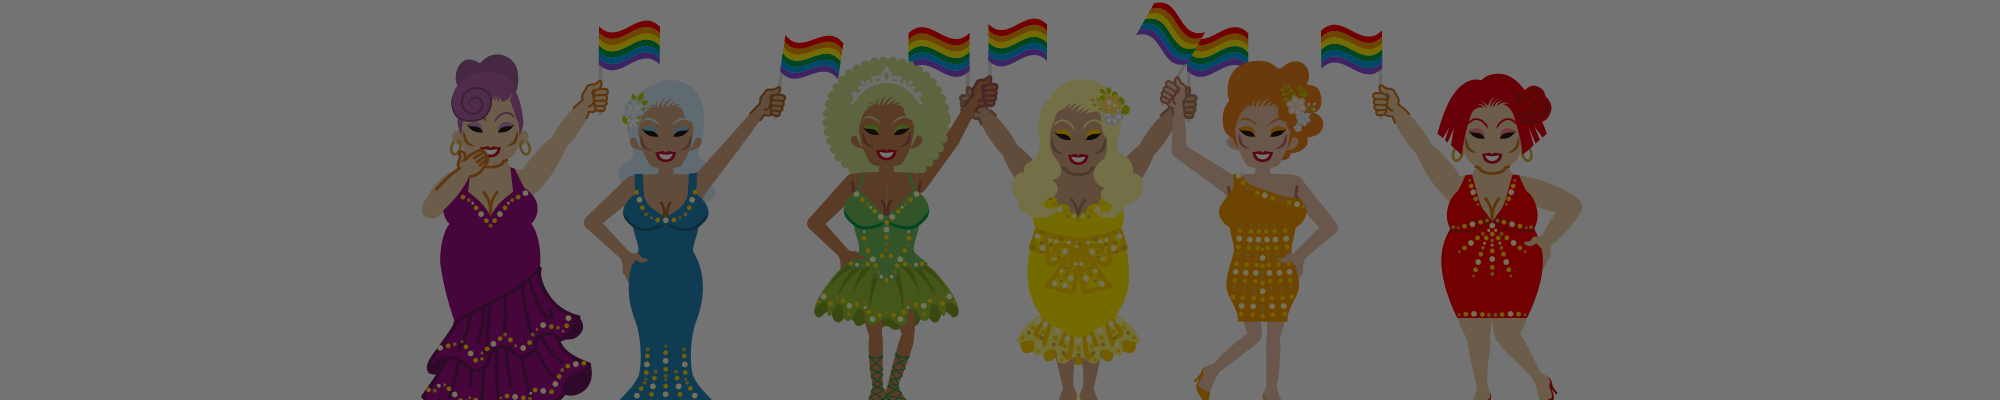 Image of drag queens holding up rainbow flags.